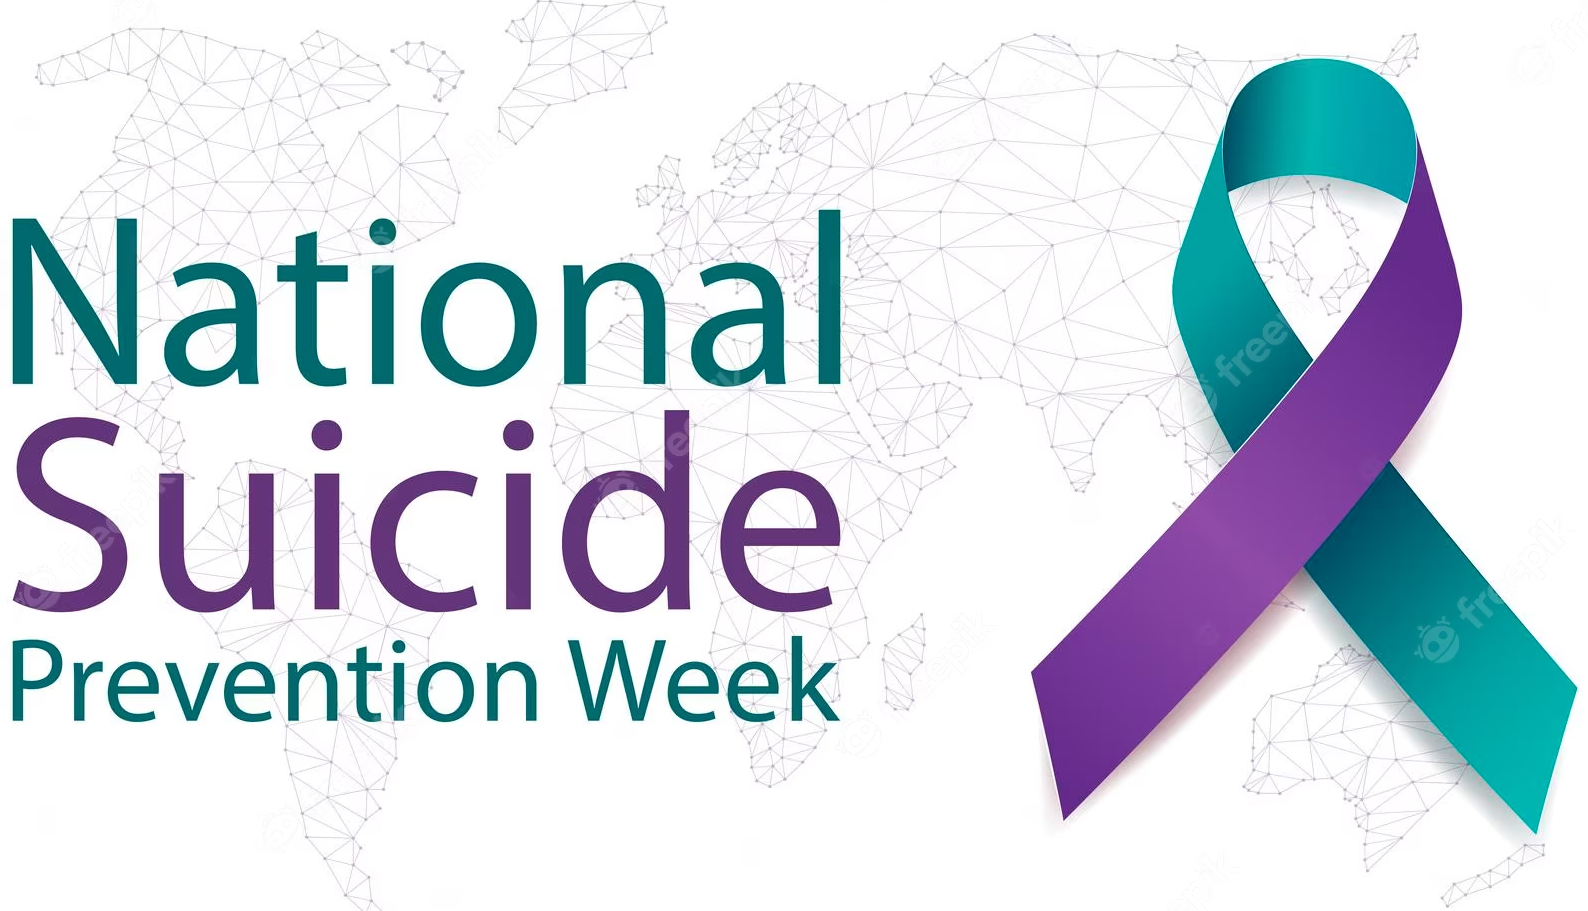 national-suicide-prevention-week-concept-banner-september-5-11-with-teal-purple-ribbon-awareness-text_468958-47.jpg copy